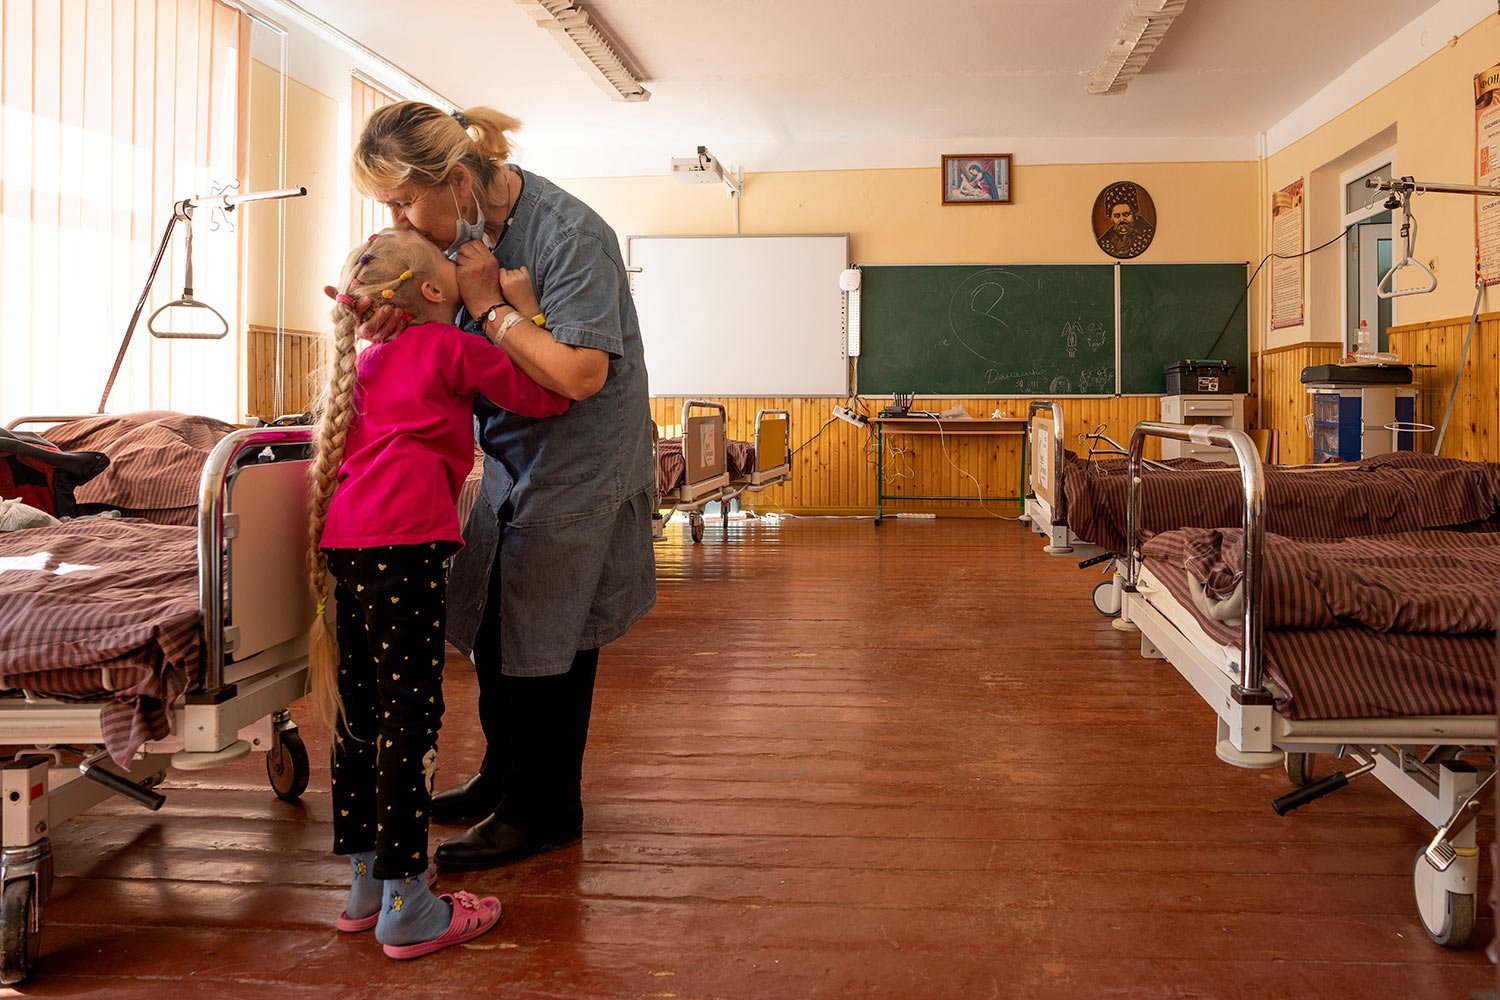  Nadia kisses her 10-year-old granddaughter Zlata Moiseinko, suffering from a chronic heart condition, as she receives treatment at a schoolhouse that has been converted into a field hospital in Mostyska, western Ukraine, Thursday, March 24, 2022. (A